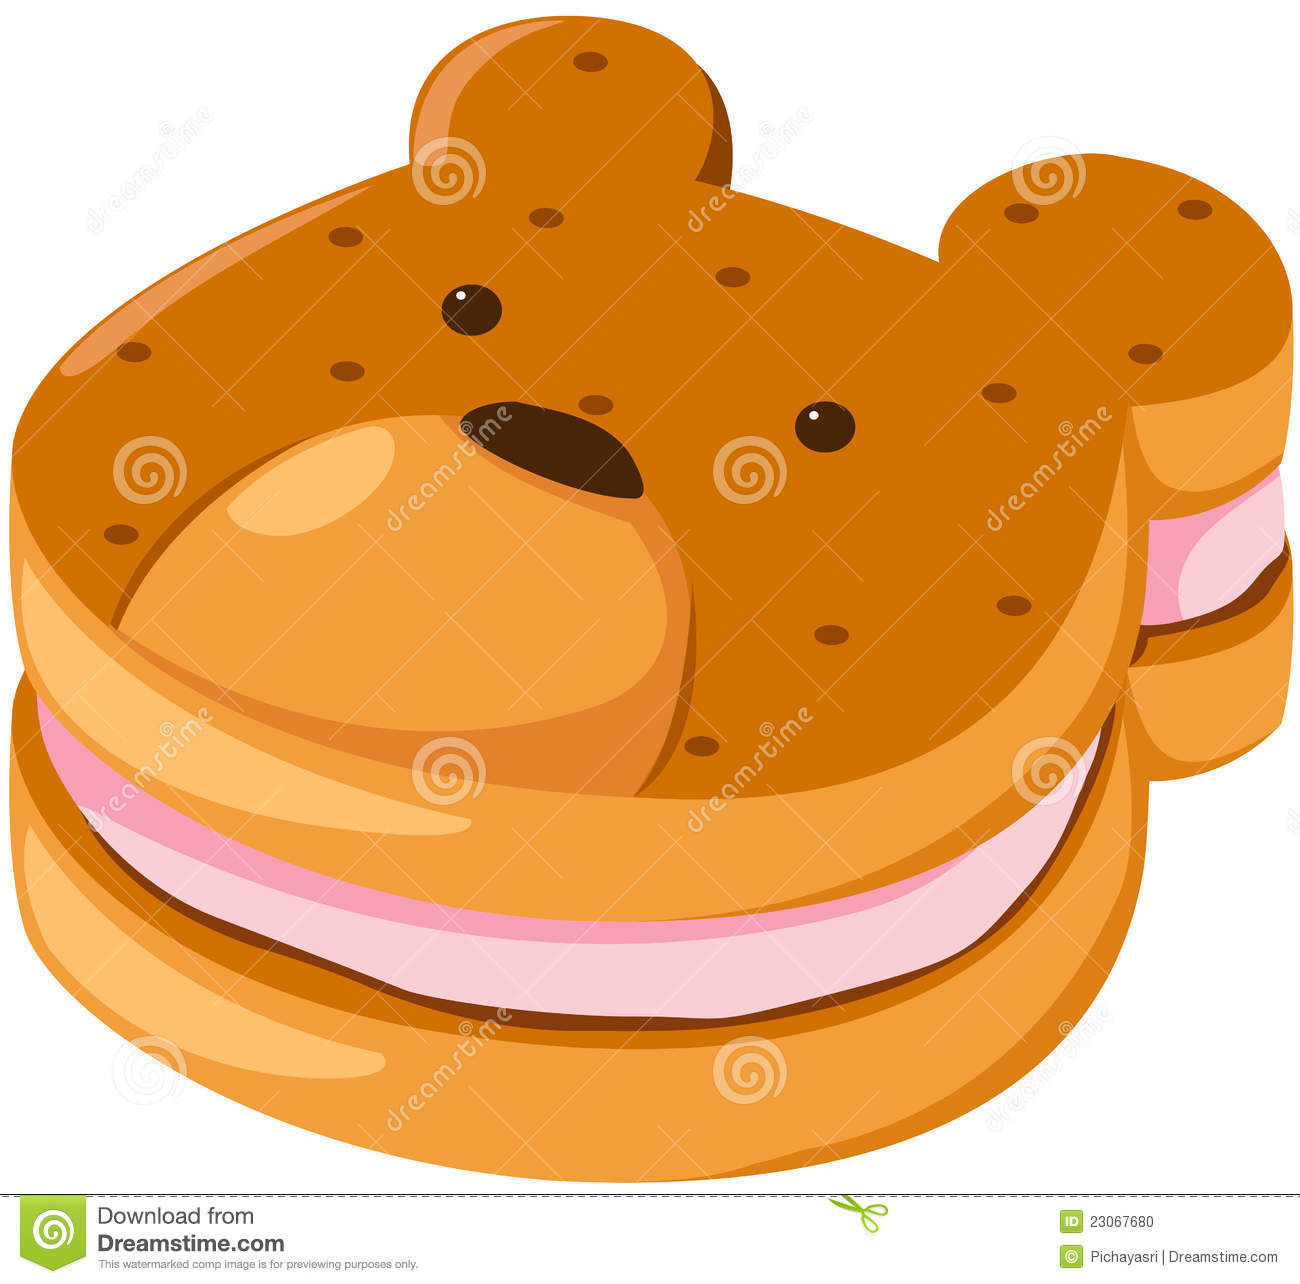 Dog Biscuit Clip Art   Clipart Panda   Free Clipart Images